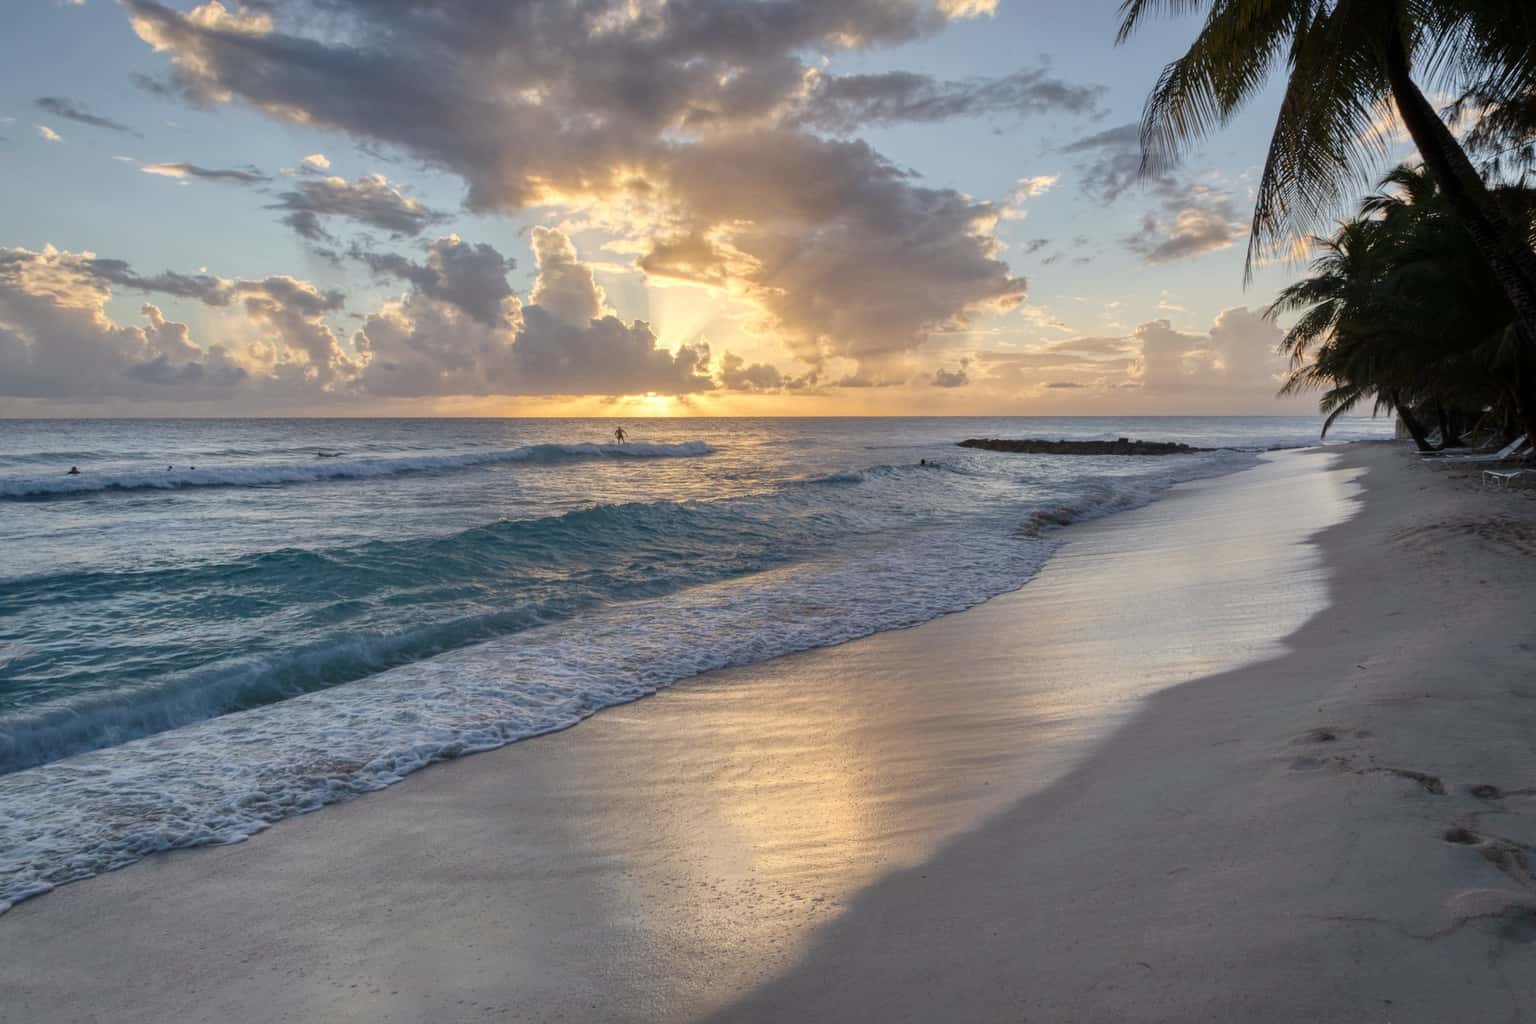  Sunset in Barbados processed using Aurora HDR 2019 